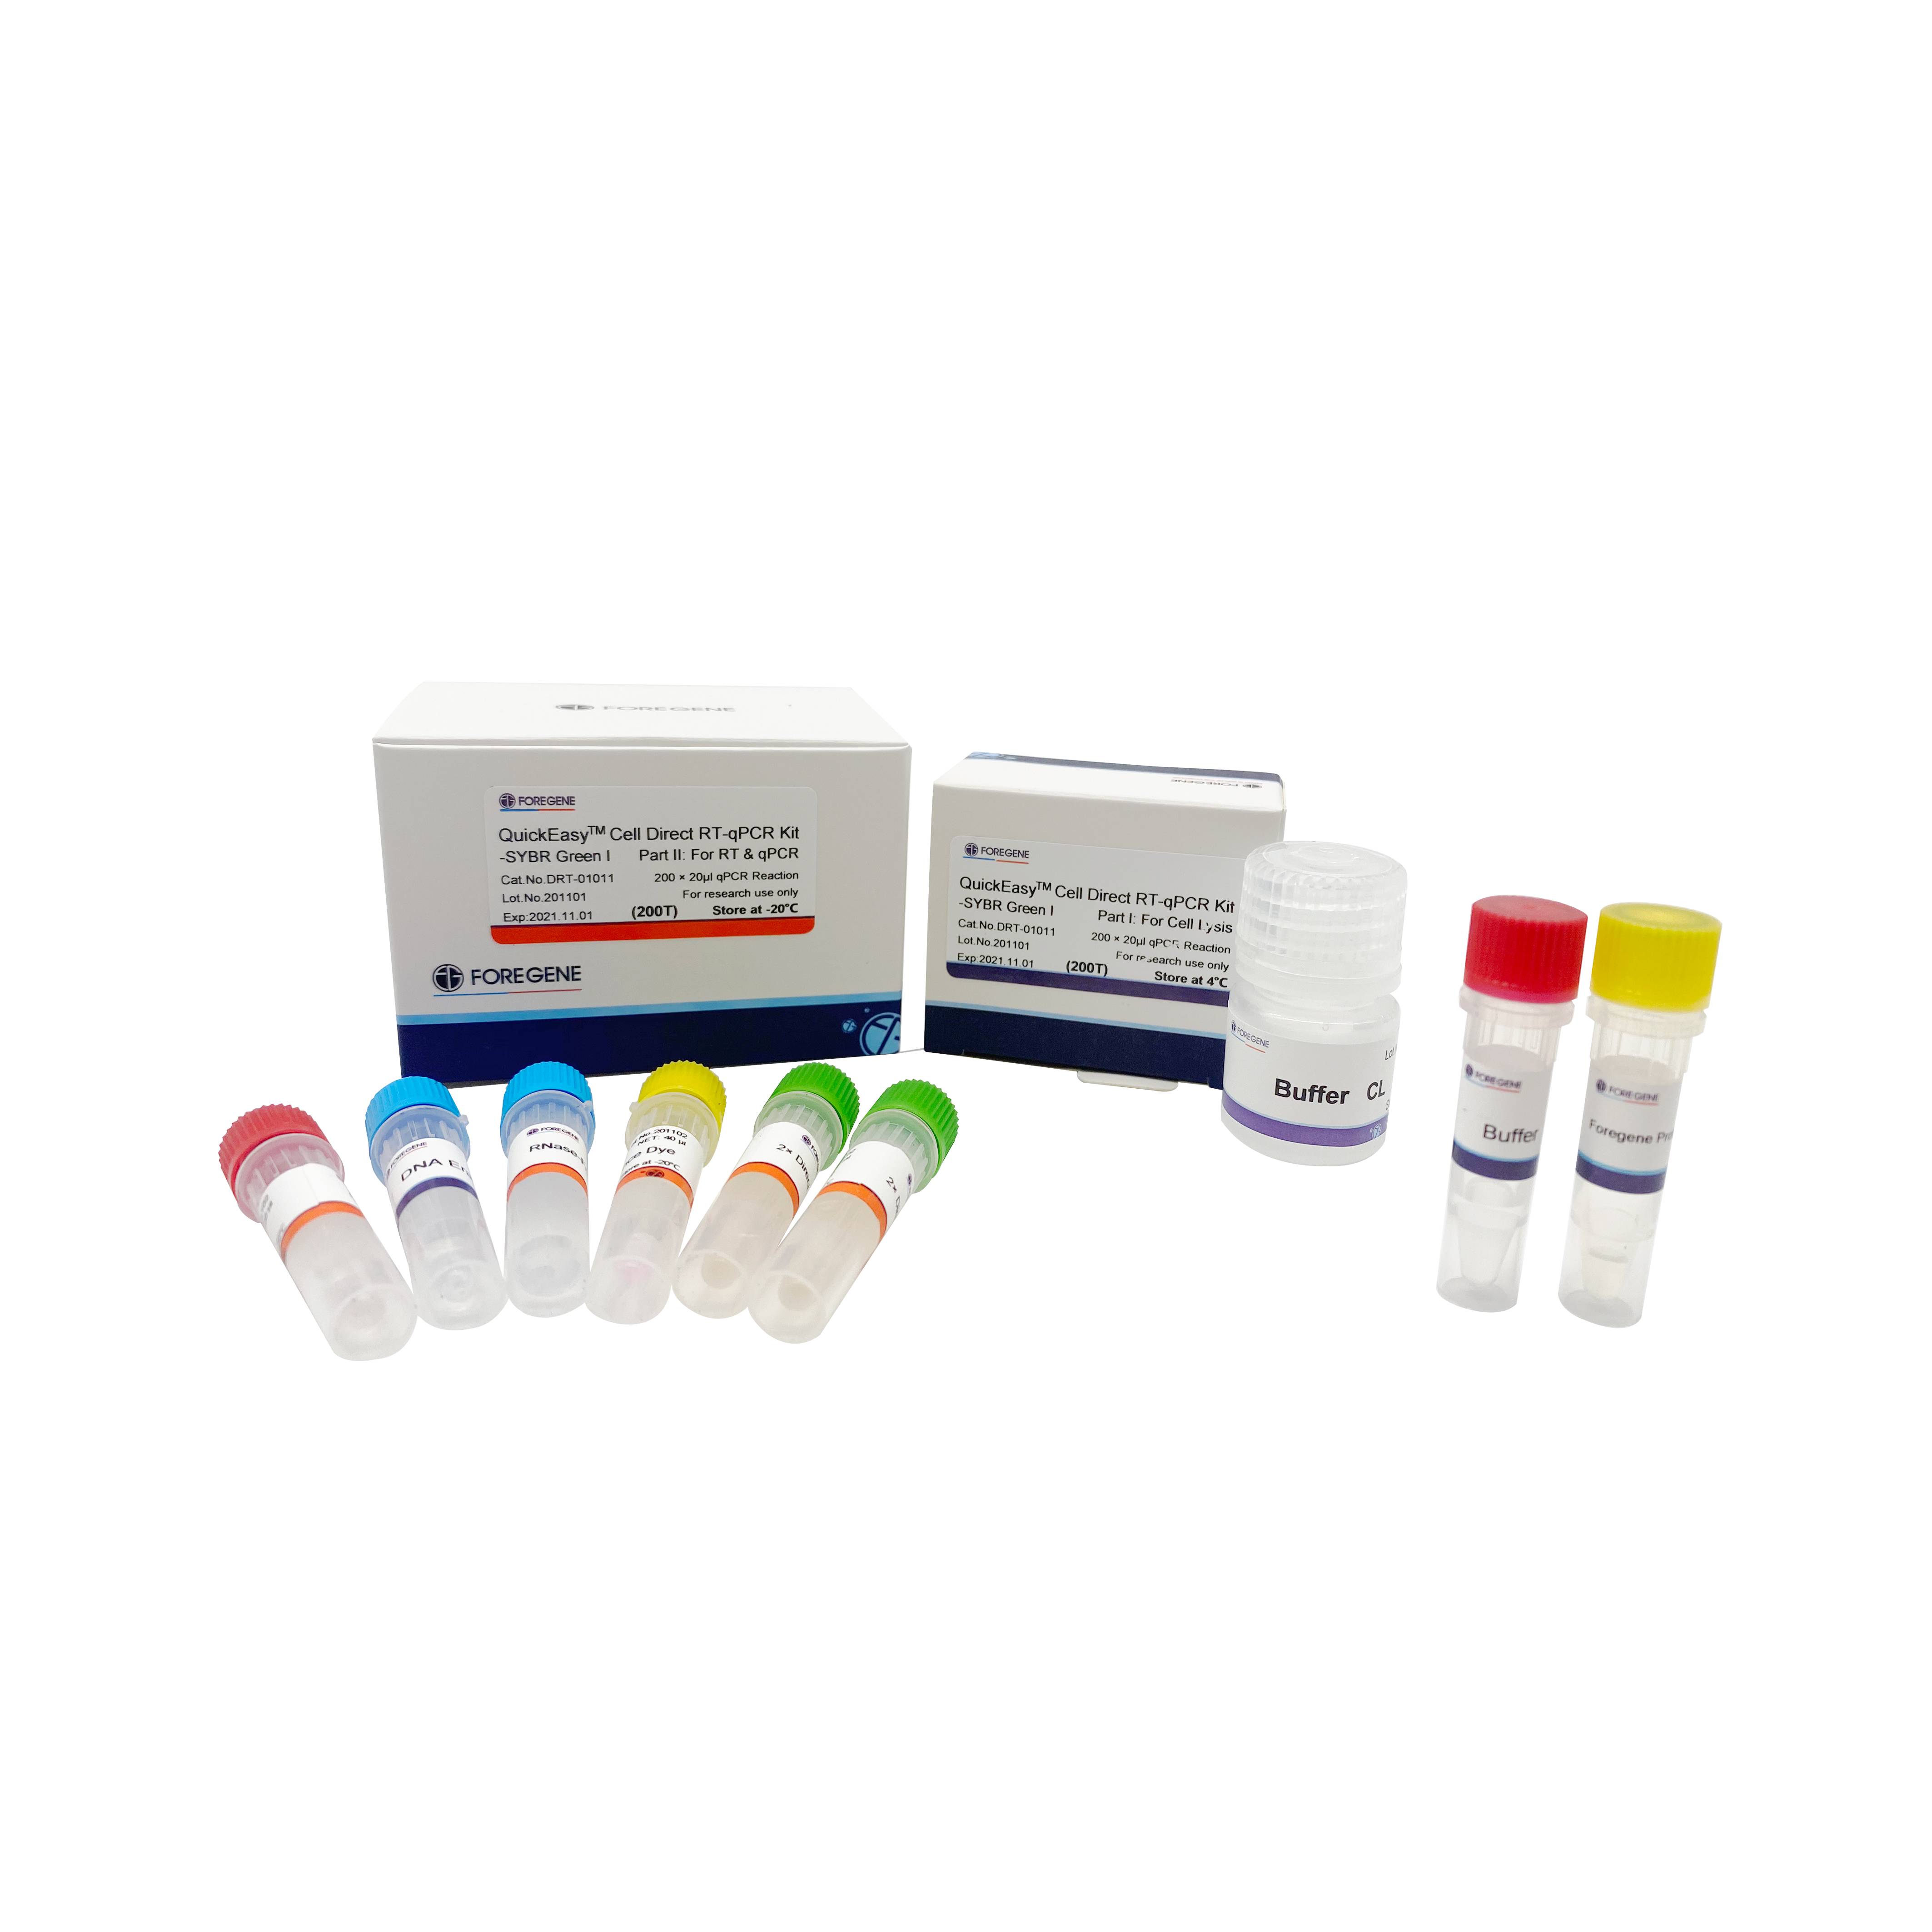 Cell Direct RT qPCR Kit—SYBR GREEN I Direct Cell Lysis Cell Ready One-step qRT-PCR Kits Featured Image